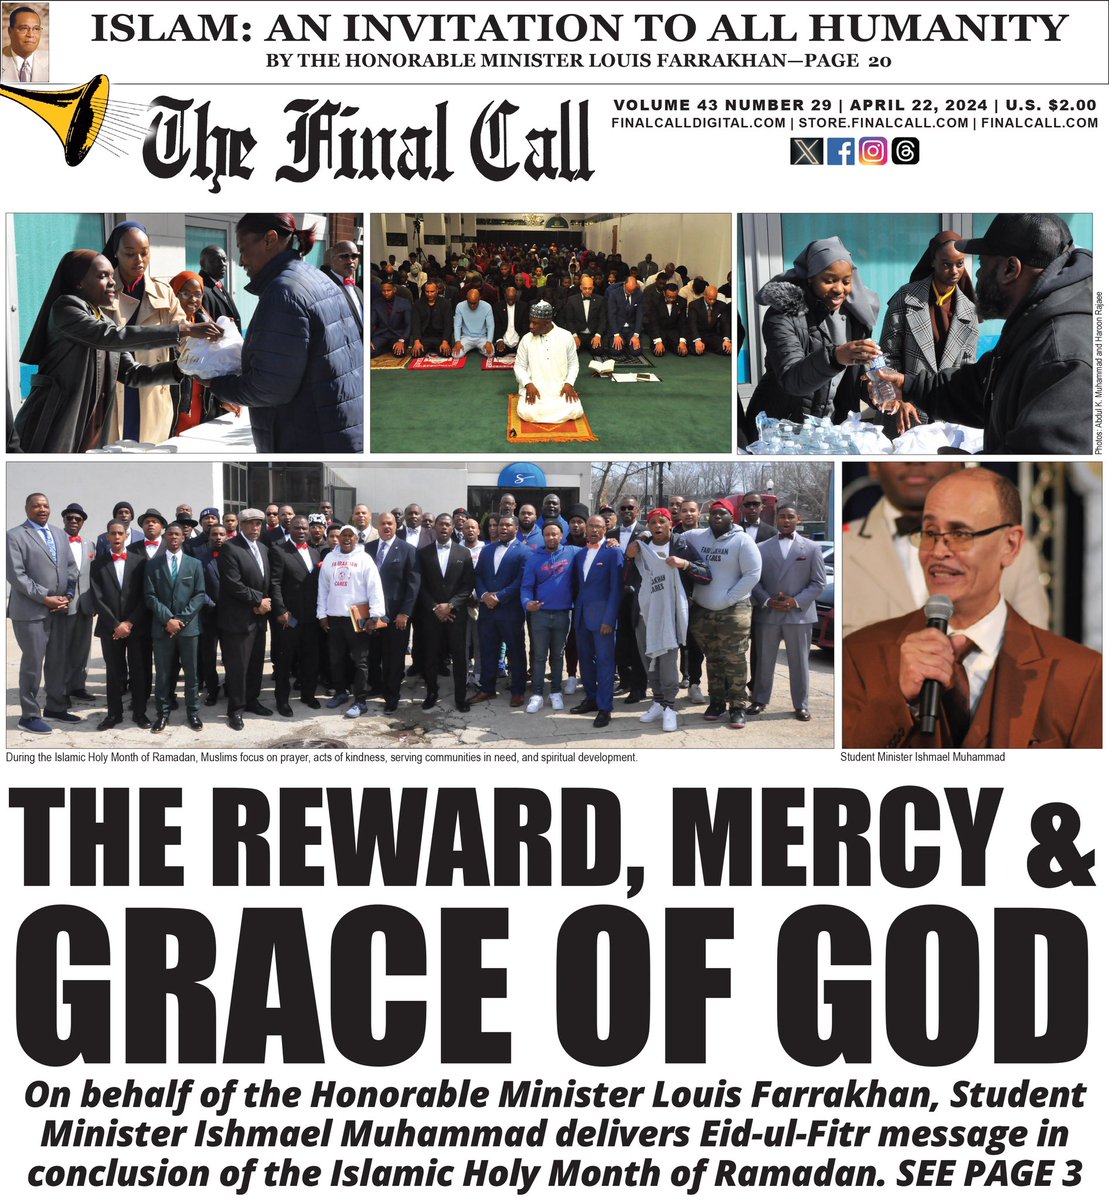 NEW EDITION ::: THE REWARD, MERCY & GRACE OF GOD On behalf of the Honorable Minister Louis Farrakhan, Student Minister Ishmael Muhammad delivers Eid-ul-Fitr message in conclusion of the Islamic Holy Month of Ramadan. Read more at finalcall.com